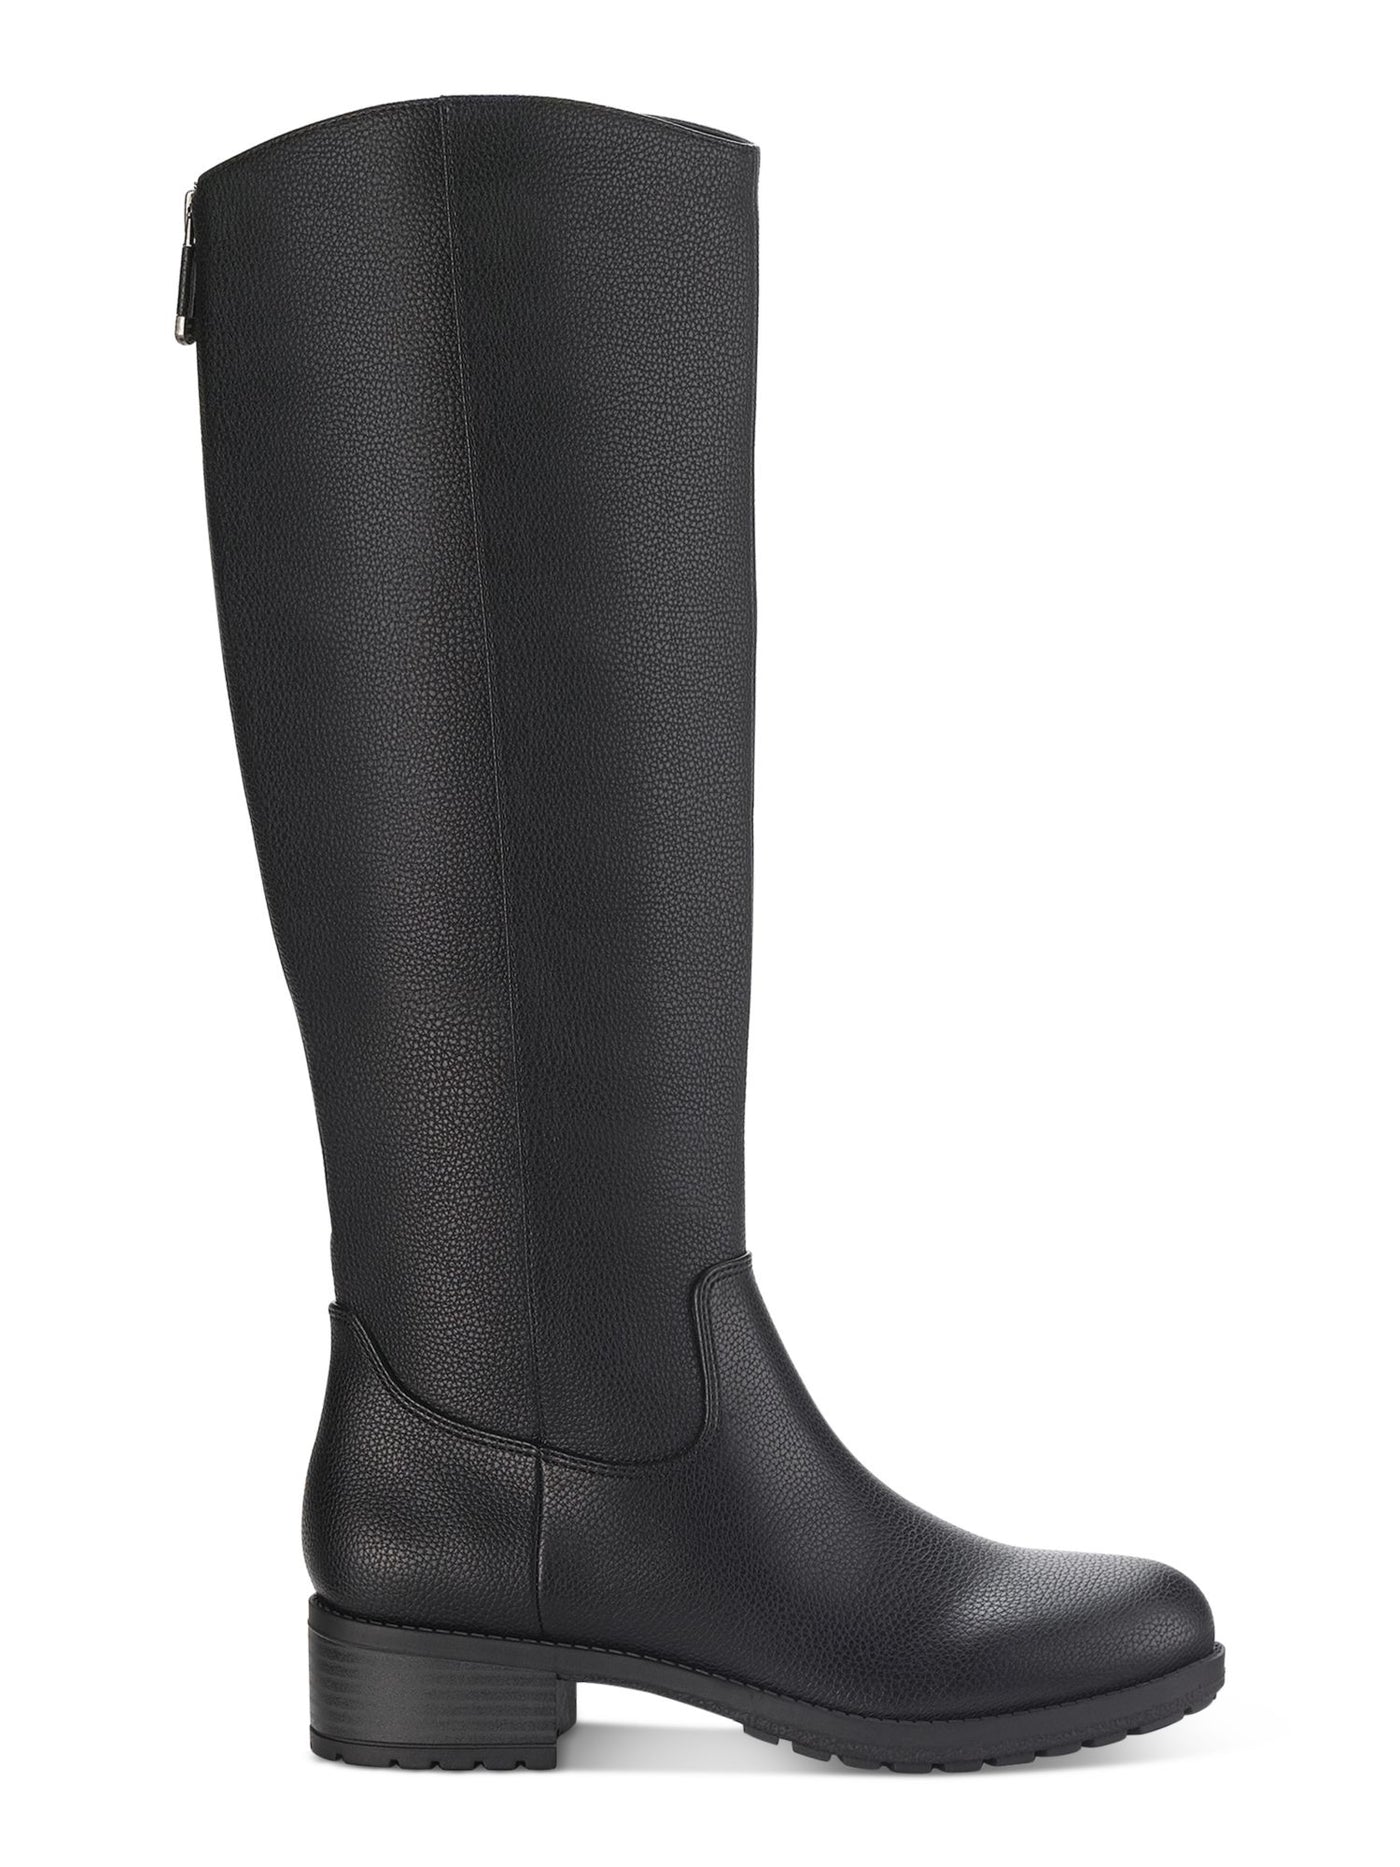 STYLE & COMPANY Womens Black Cushioned Zipper Accent Stretch Graciee Round Toe Block Heel Zip-Up Riding Boot 7.5 M